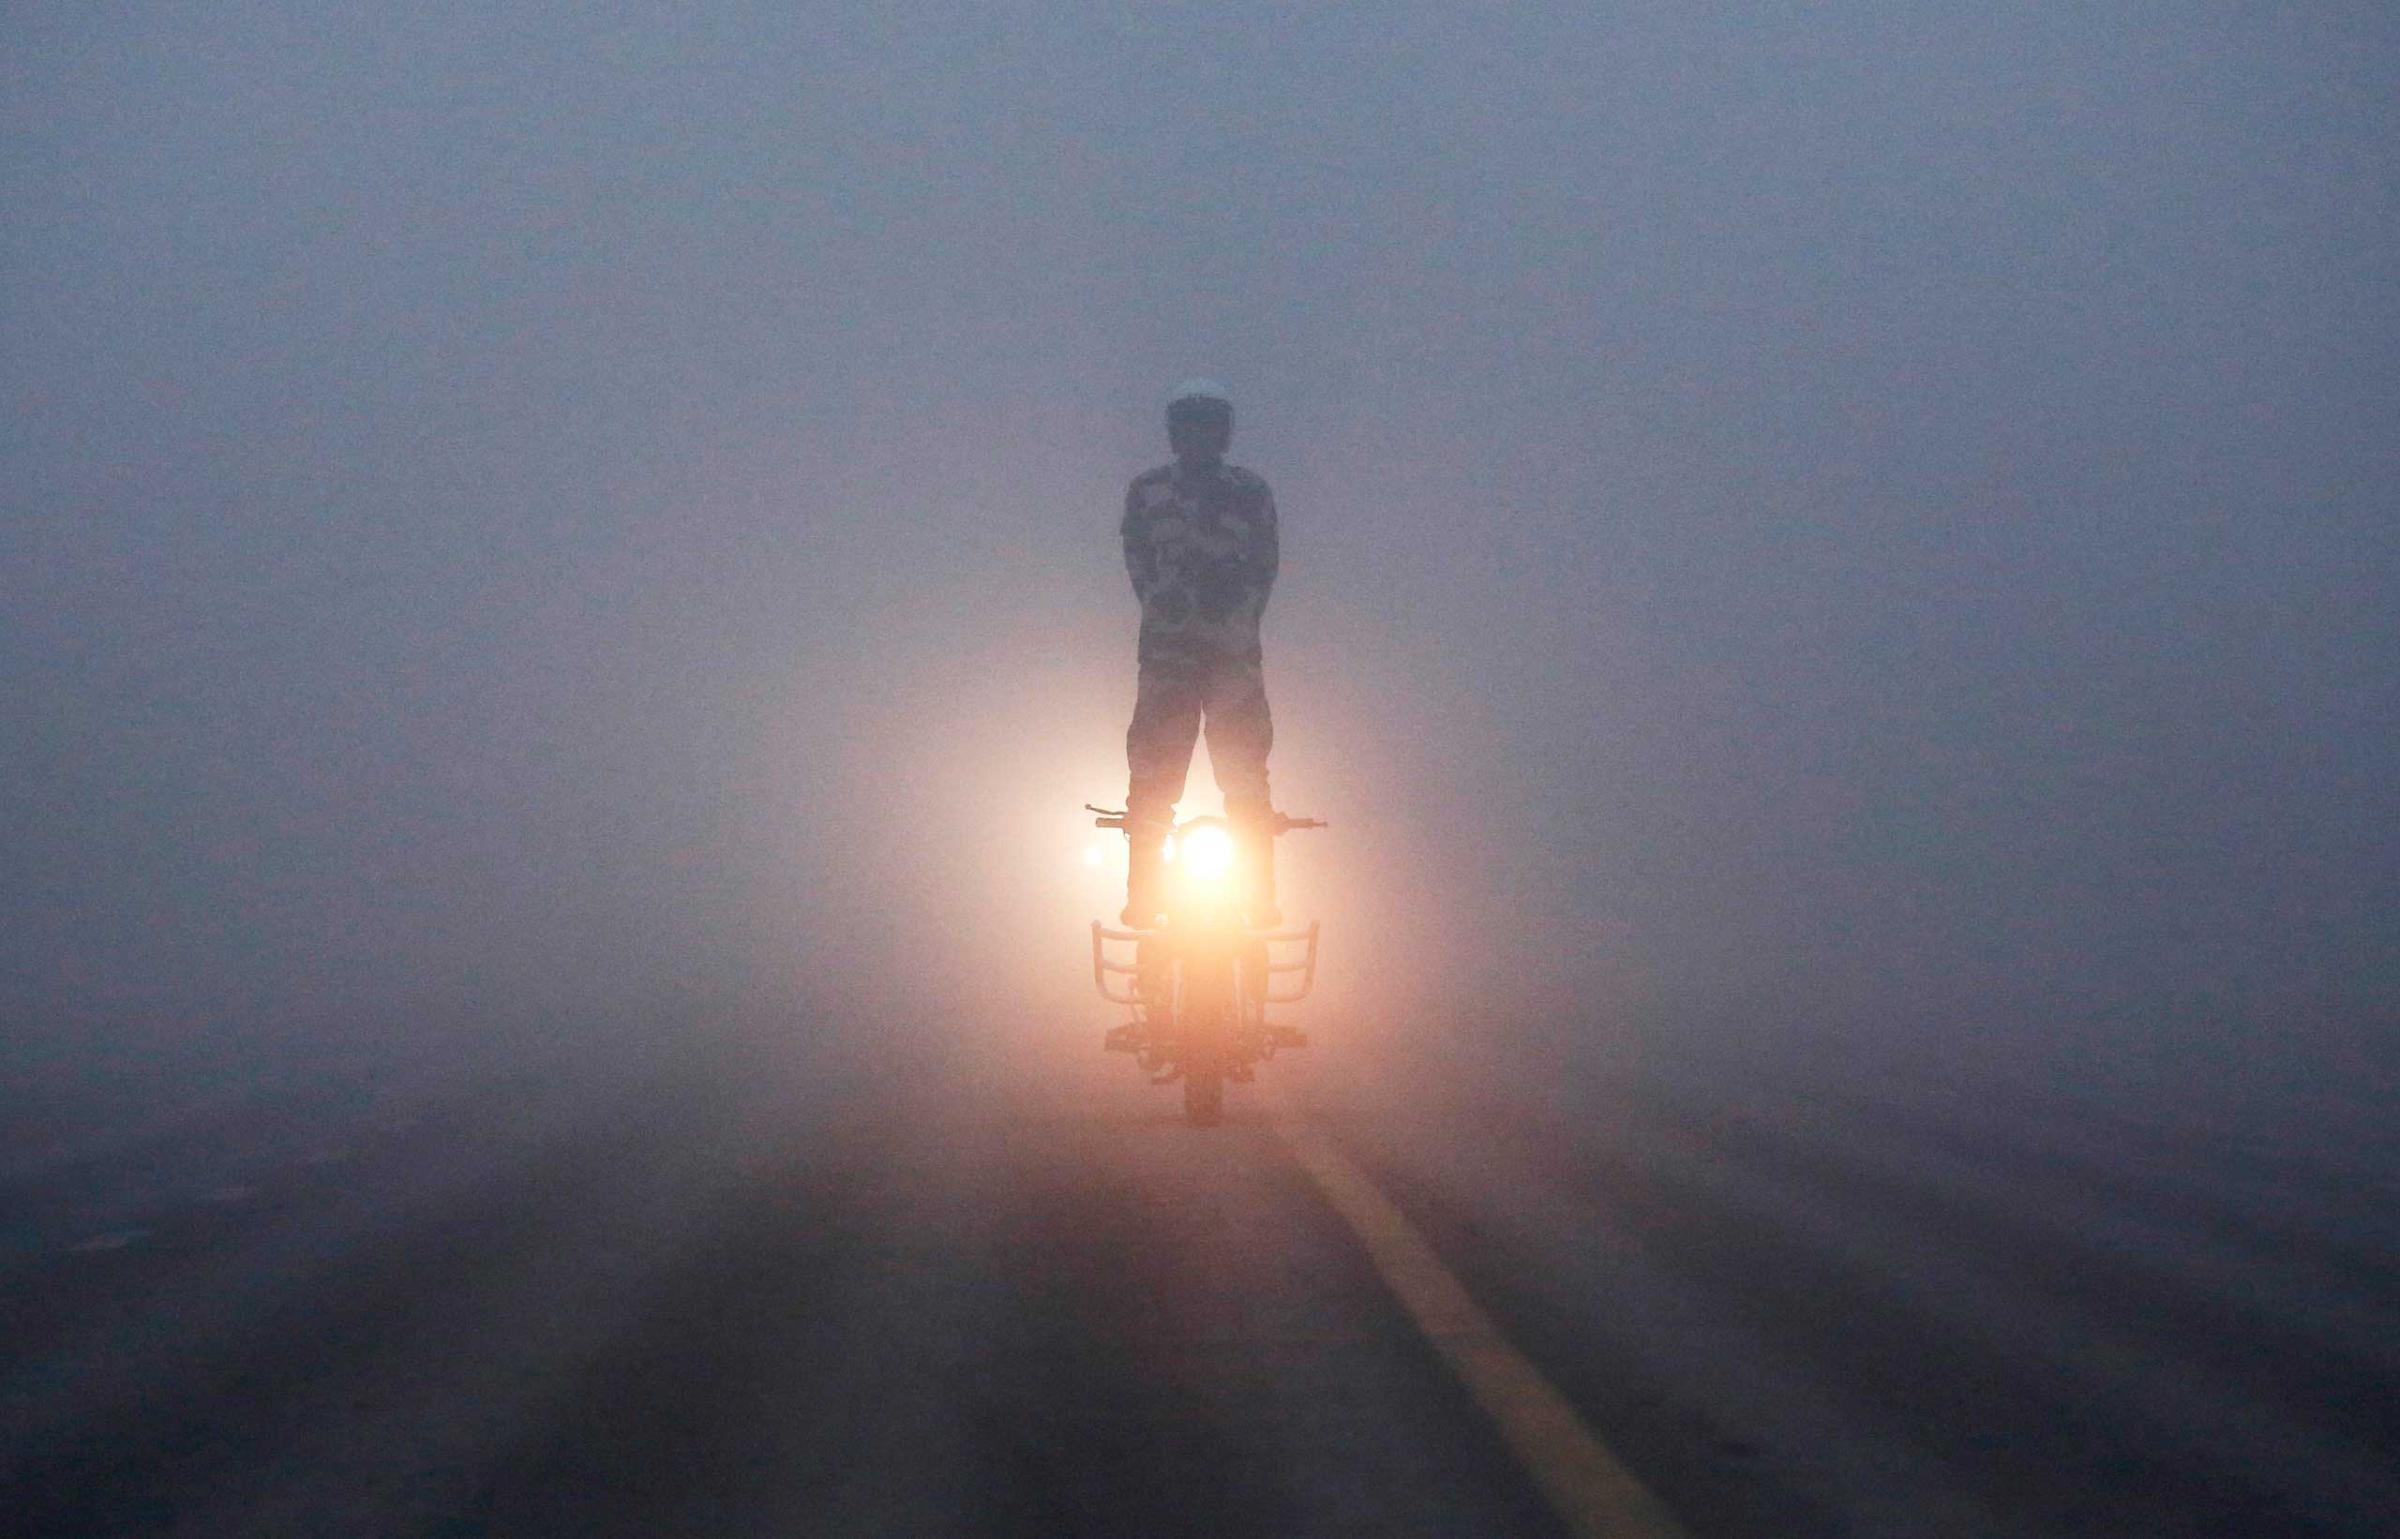 India's BSF "Daredevils" motorcycle rider performs during a rehearsal for the Republic Day parade on a foggy winter morning in New Delhi